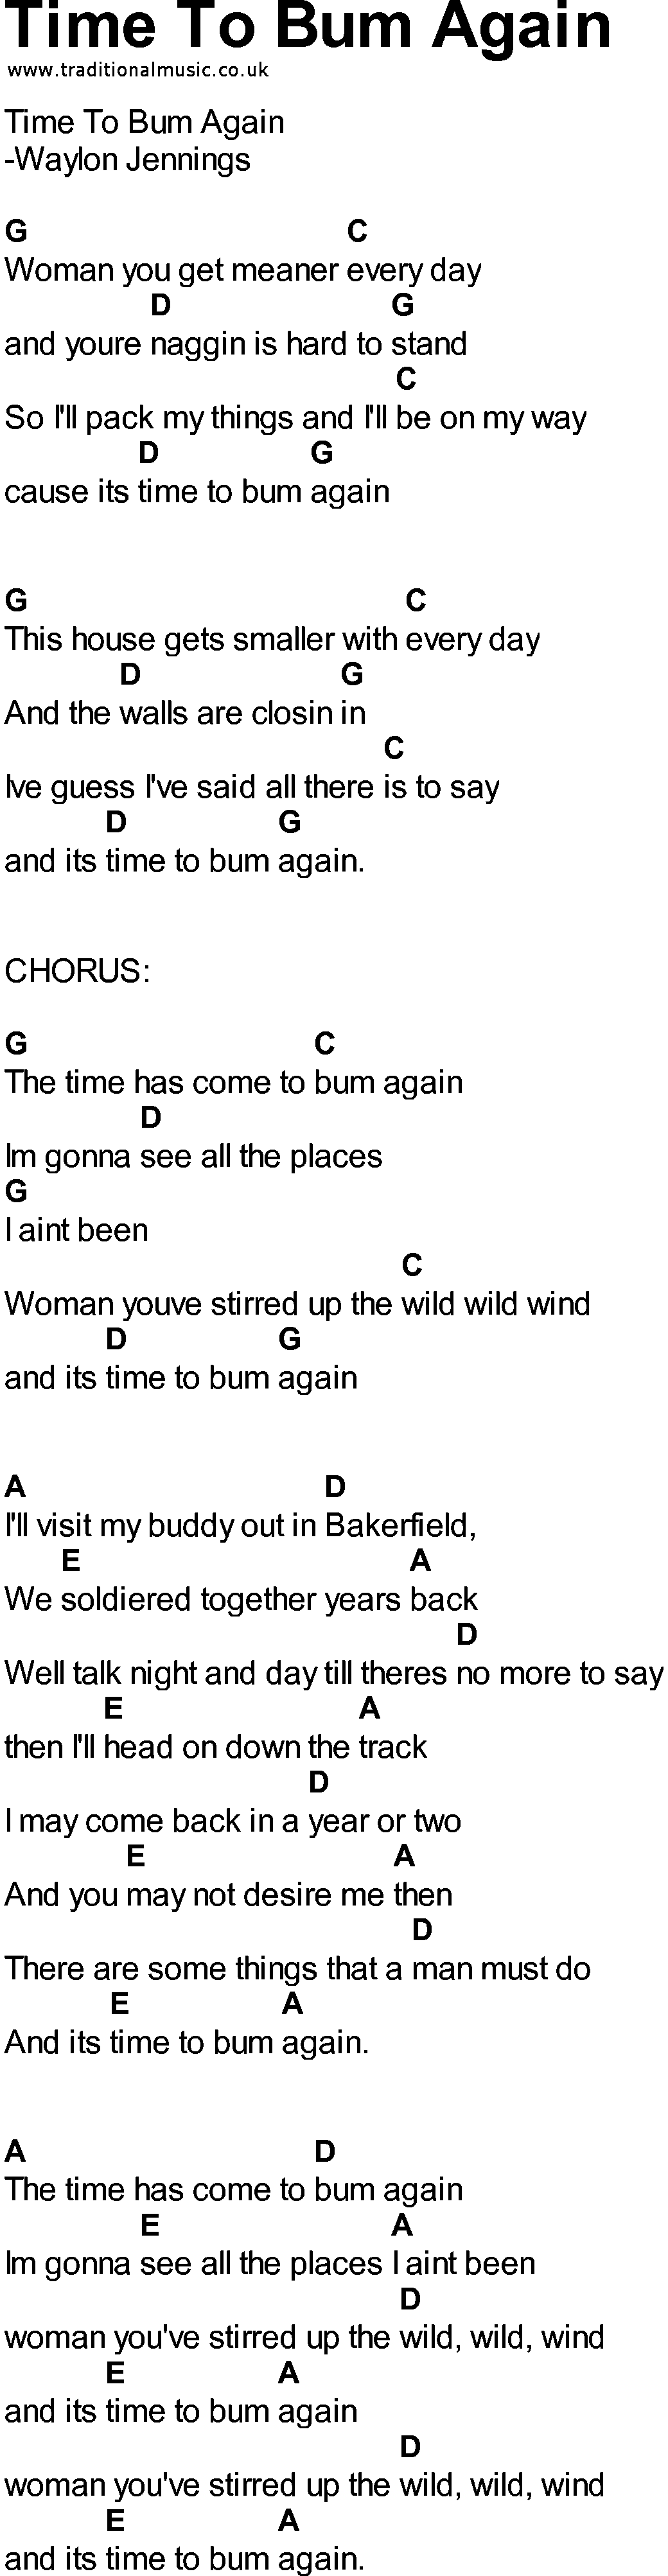 Bluegrass songs with chords - Time To Bum Again